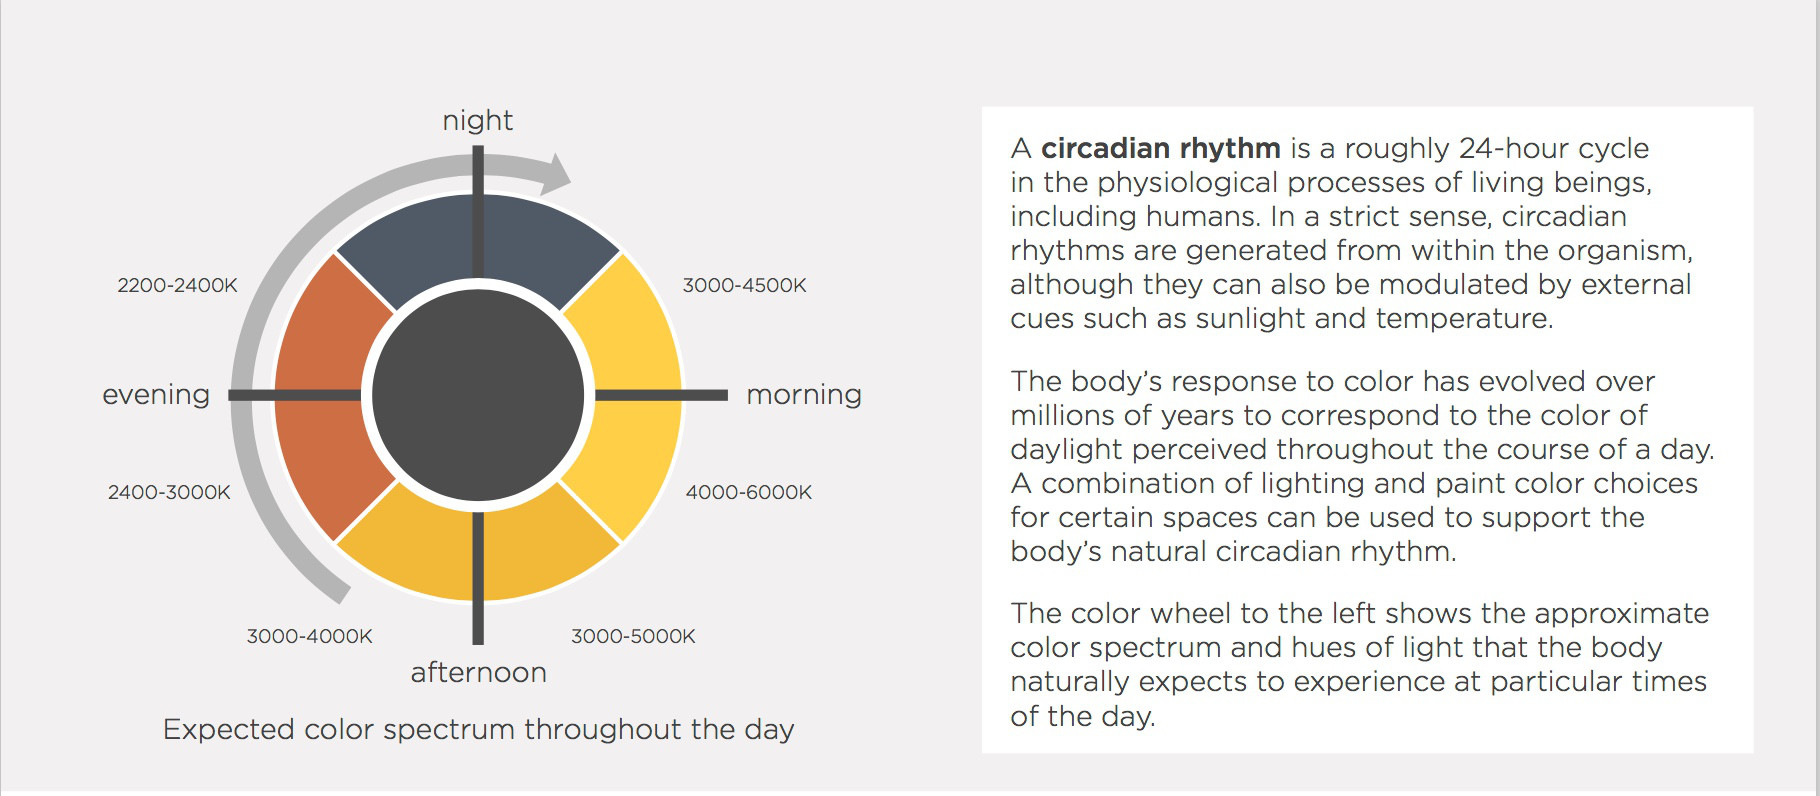 A circadian rhythm is a roughly 24-hour cycle in the physiological processes of living beings, including humans. In a strict sense, circadian rhythms are generated from within the organism, although they can also be modulated by external cues such as sunlight and temperature.
The body’s response to color has evolved over millions of years to correspond to the color of daylight perceived throughout the course of a day. A combination of lighting and paint color choices for certain spaces can be used to support the body’s natural circadian rhythm.
The color wheel to the left shows the approximate color spectrum and hues of light that the body naturally expects to experience at particular times of the day.